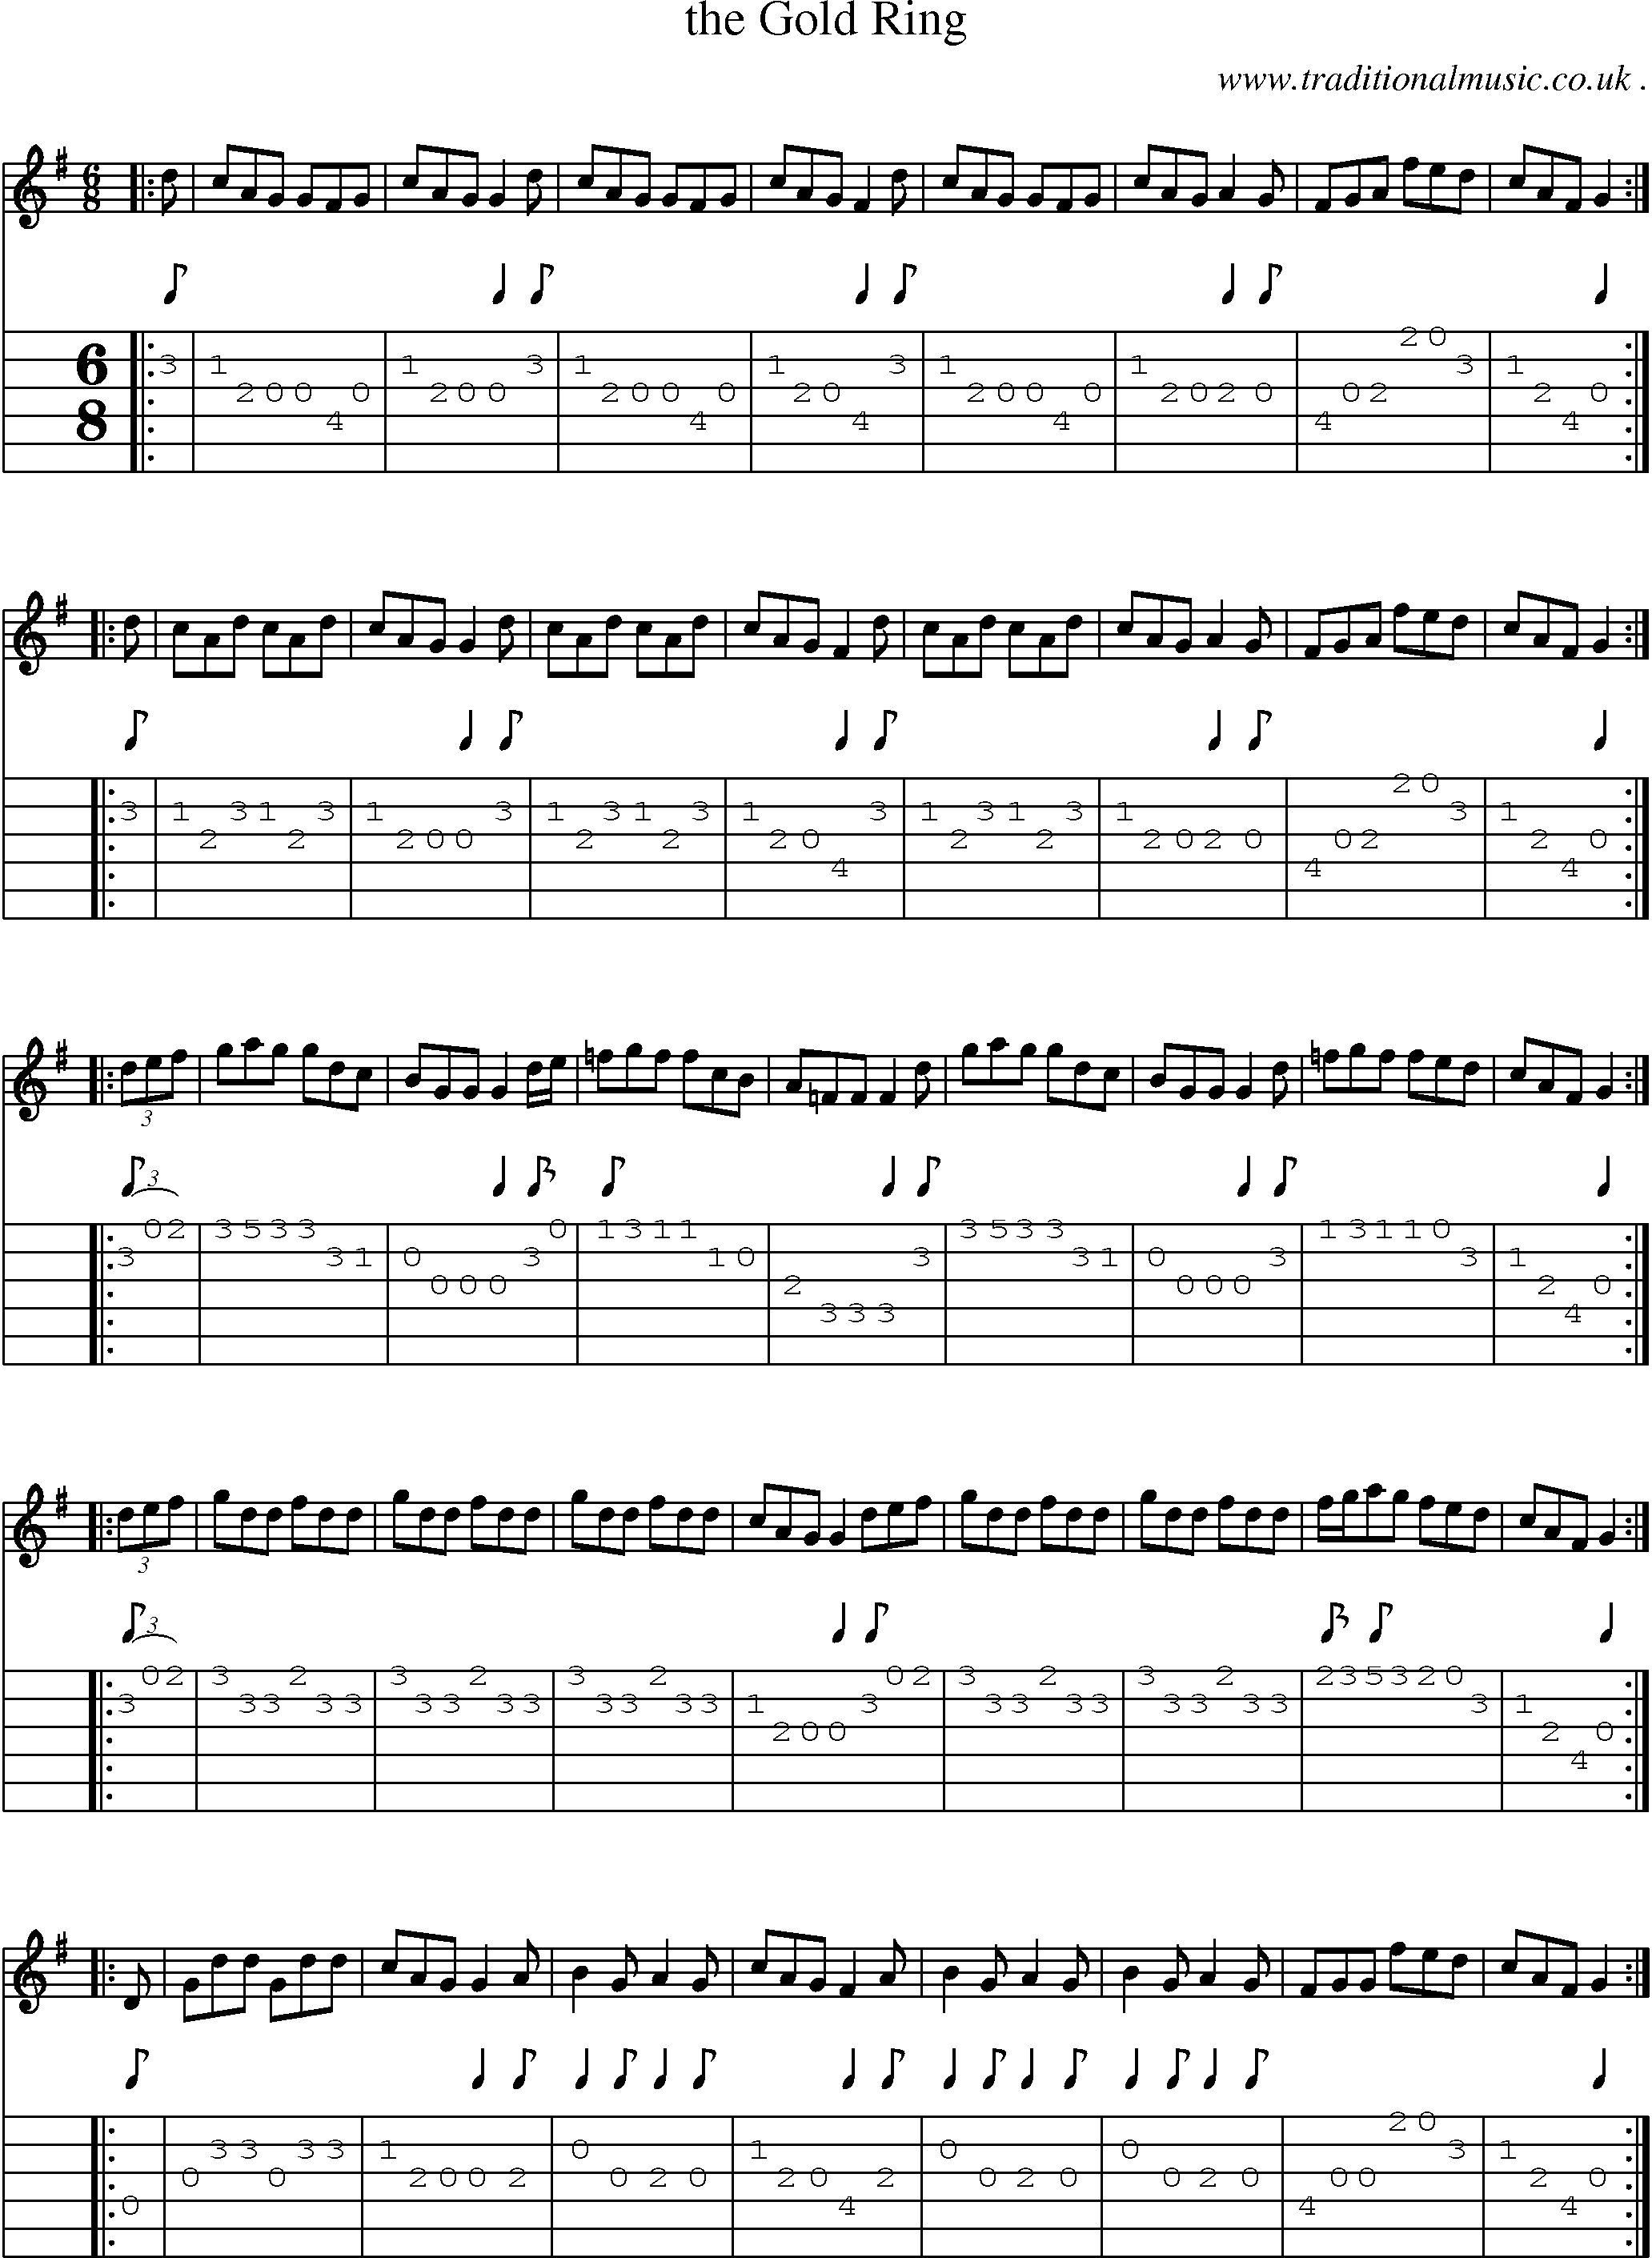 Sheet-music  score, Chords and Guitar Tabs for The Gold Ring